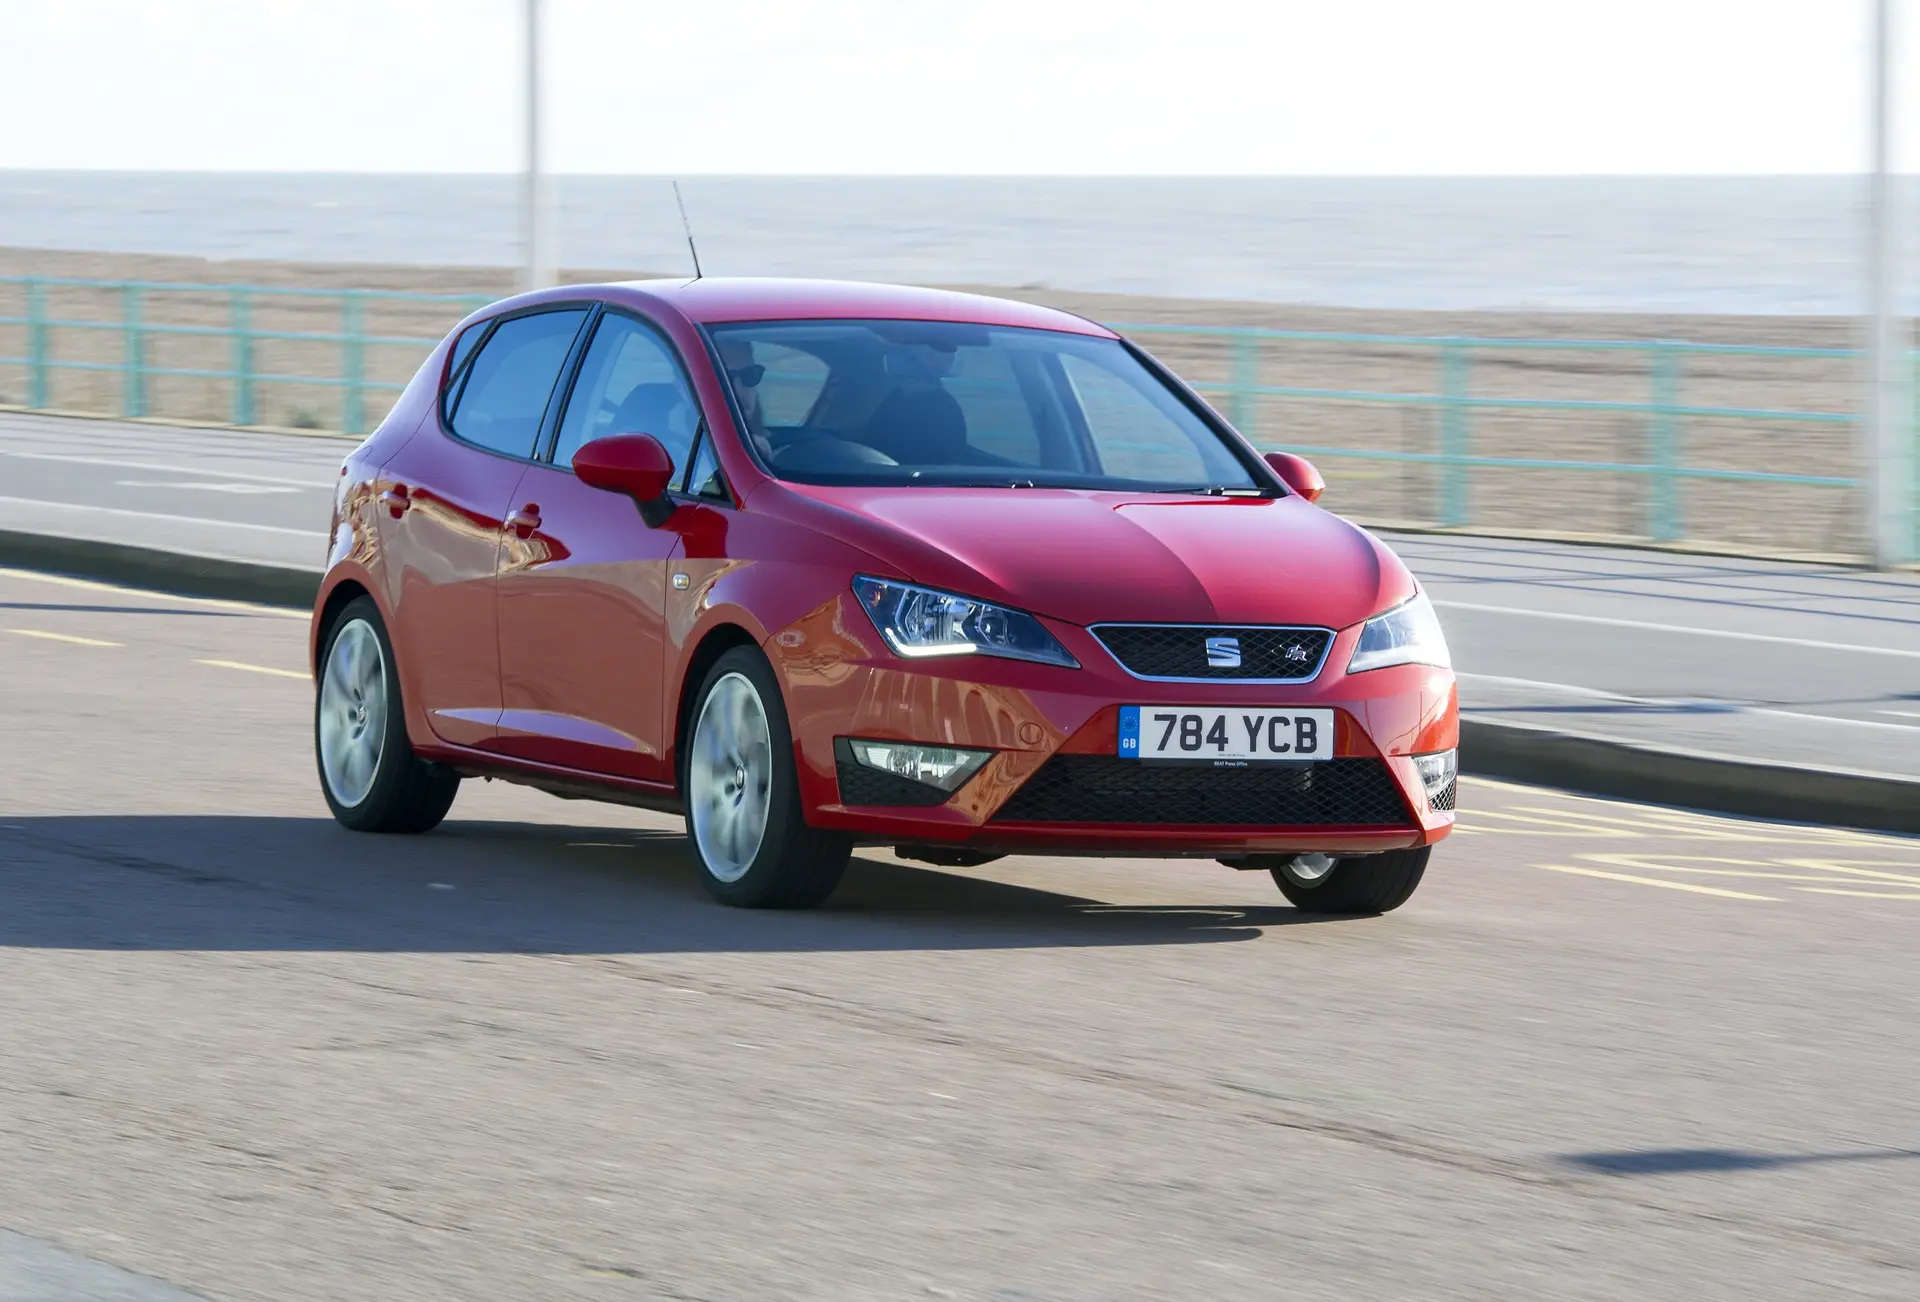 SEAT Ibiza (2008-2017) Review: exterior front three quarter photo of the SEAT Ibiza on the road